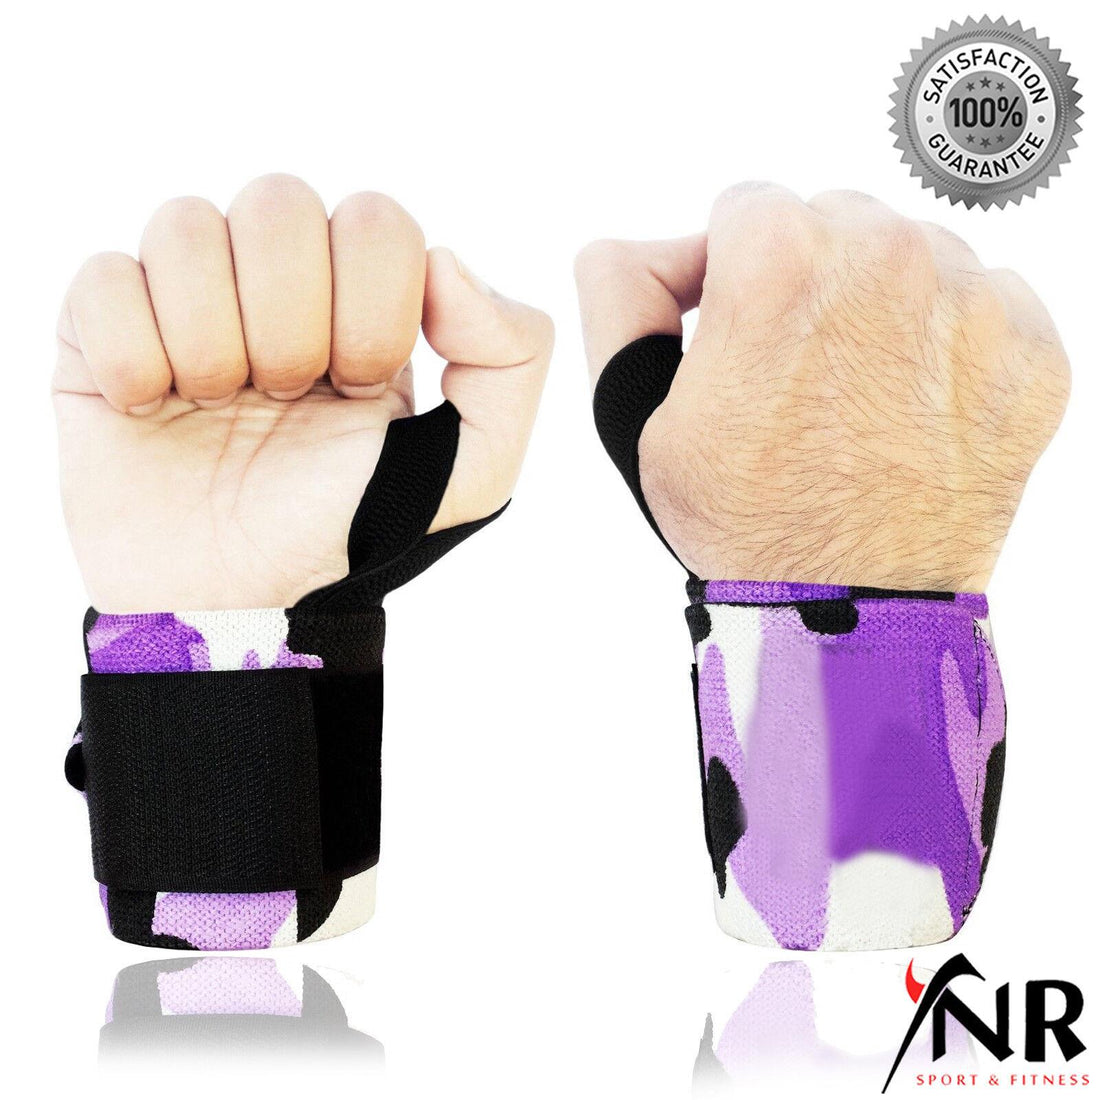 Power Weight Lifting Wrist Wraps Gym Training Straps Hand Bar Support Gloves NEW